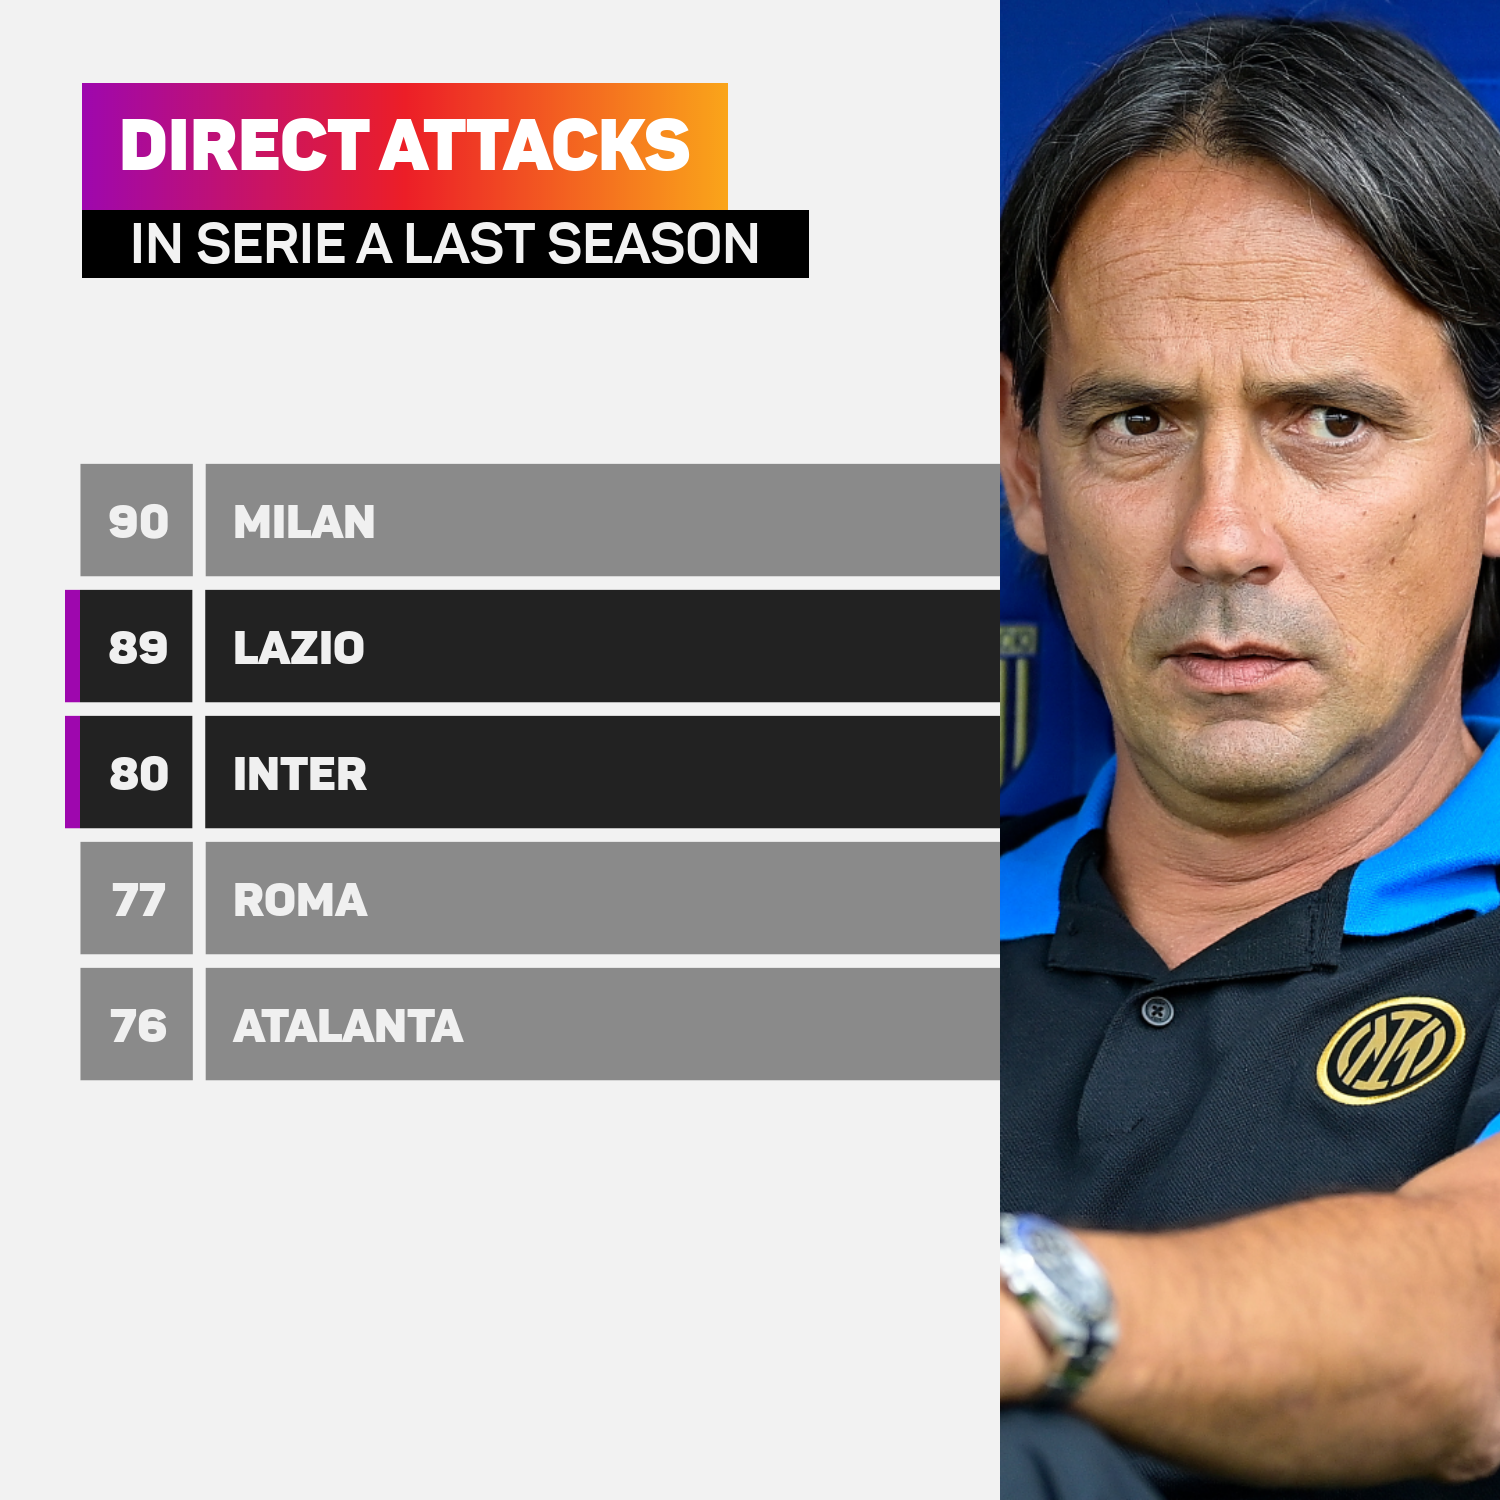 Milan led the way for direct attacks in Serie A last season